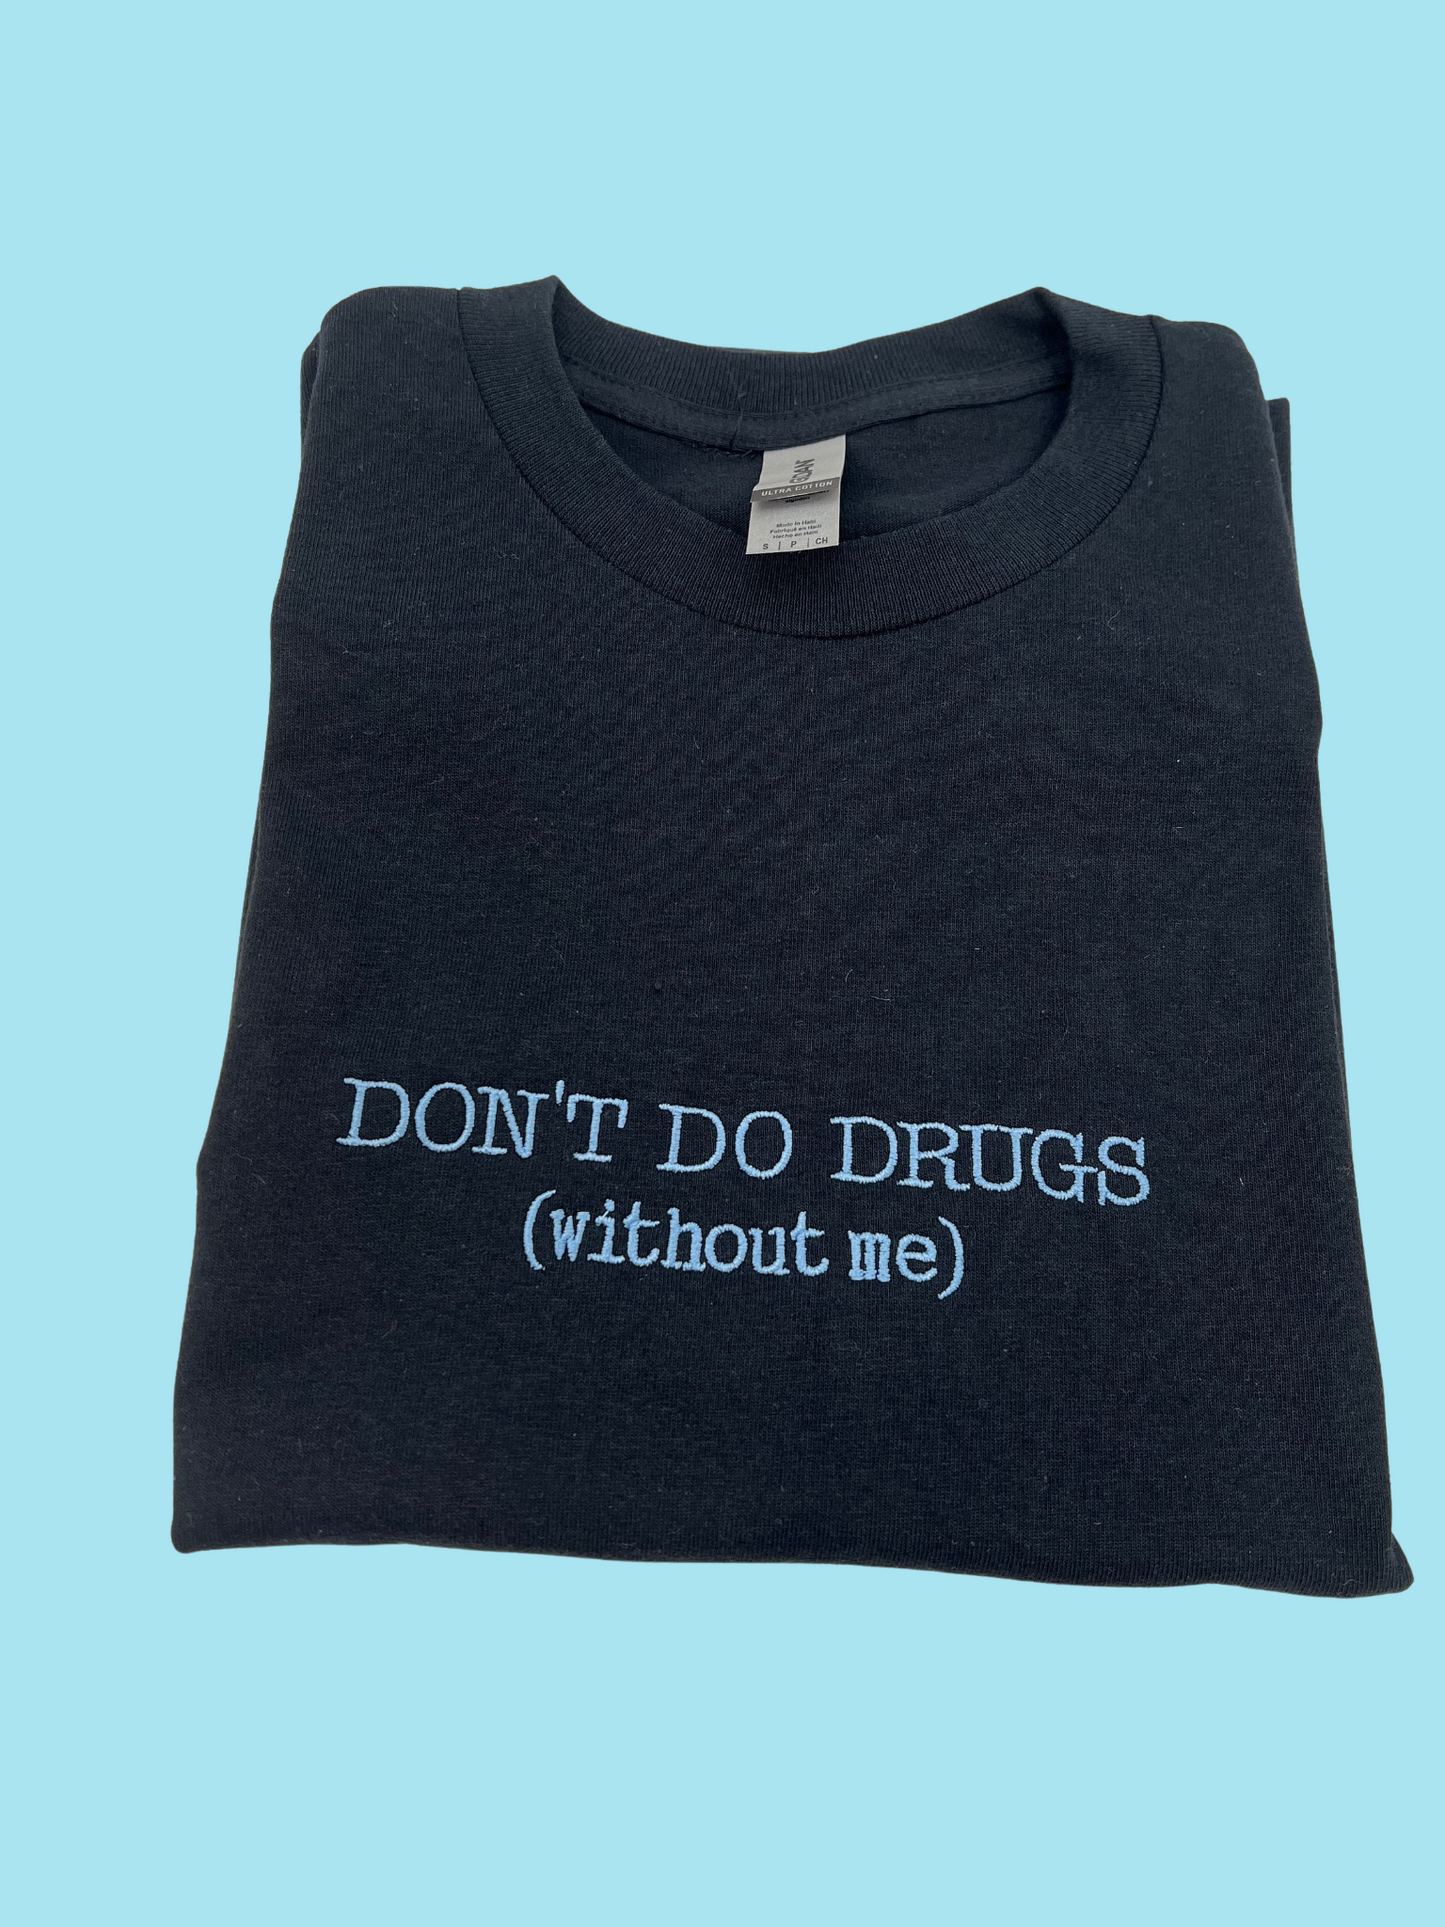 Don't Do Drugs Without Me Unisex Shirt